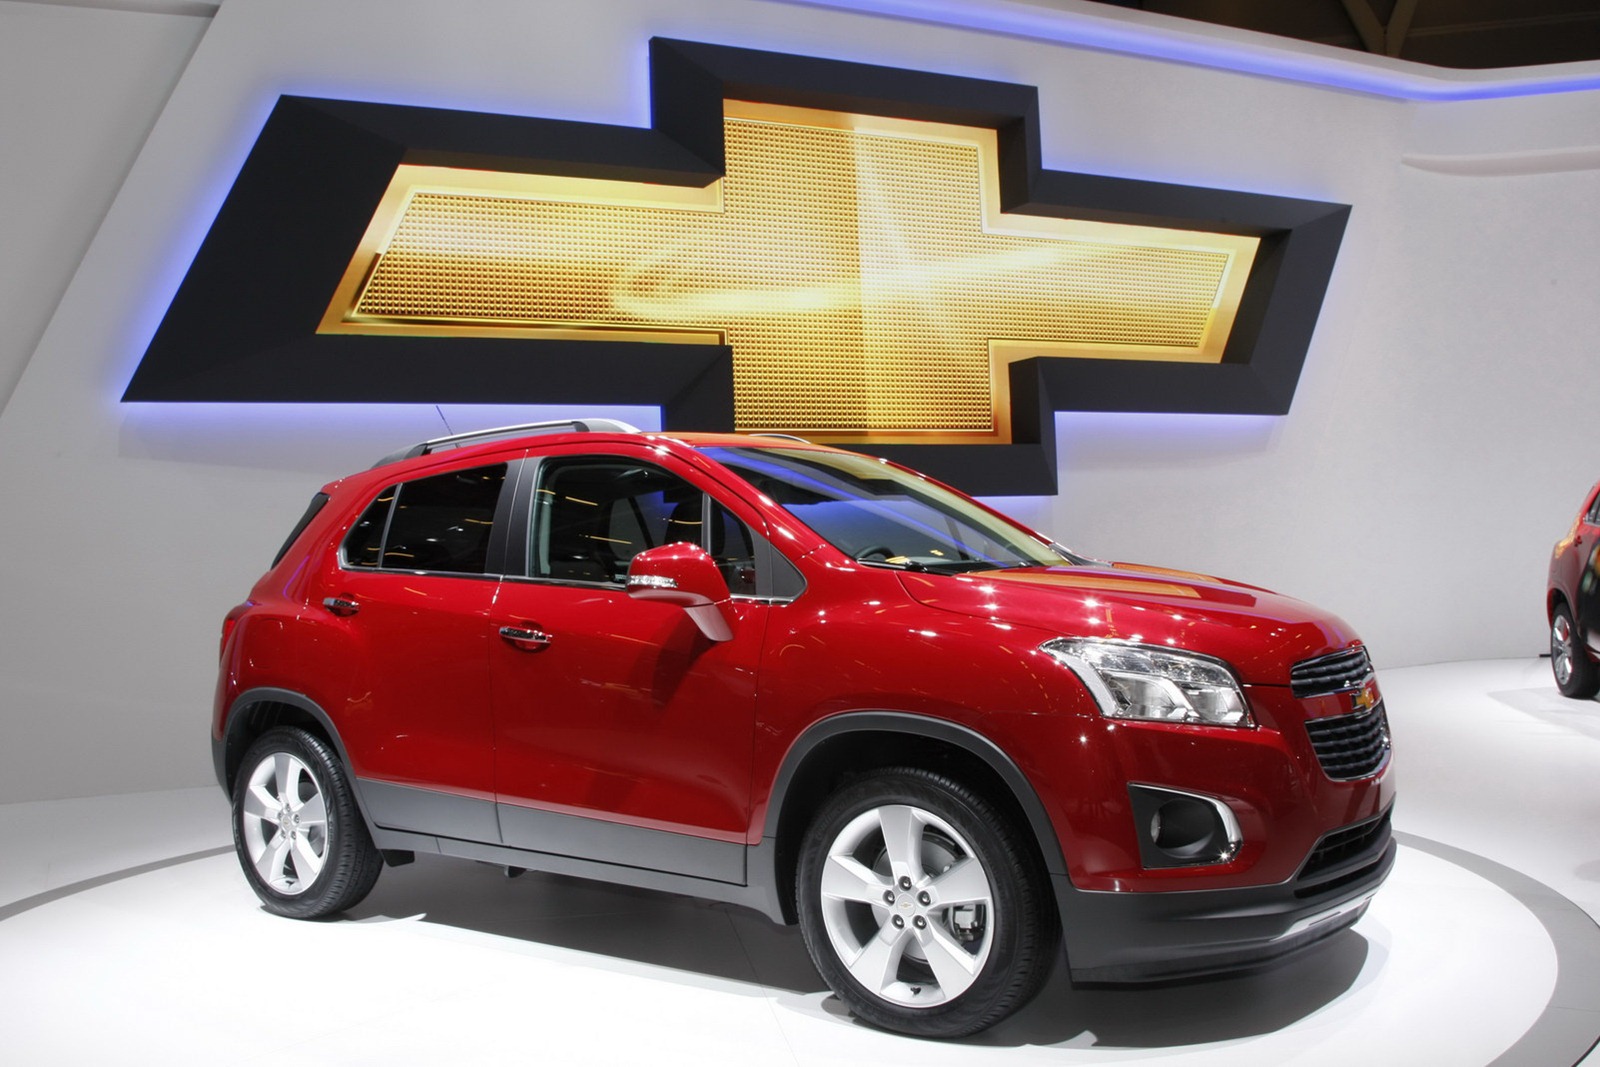 GM to Launch up to 8 New Models in India